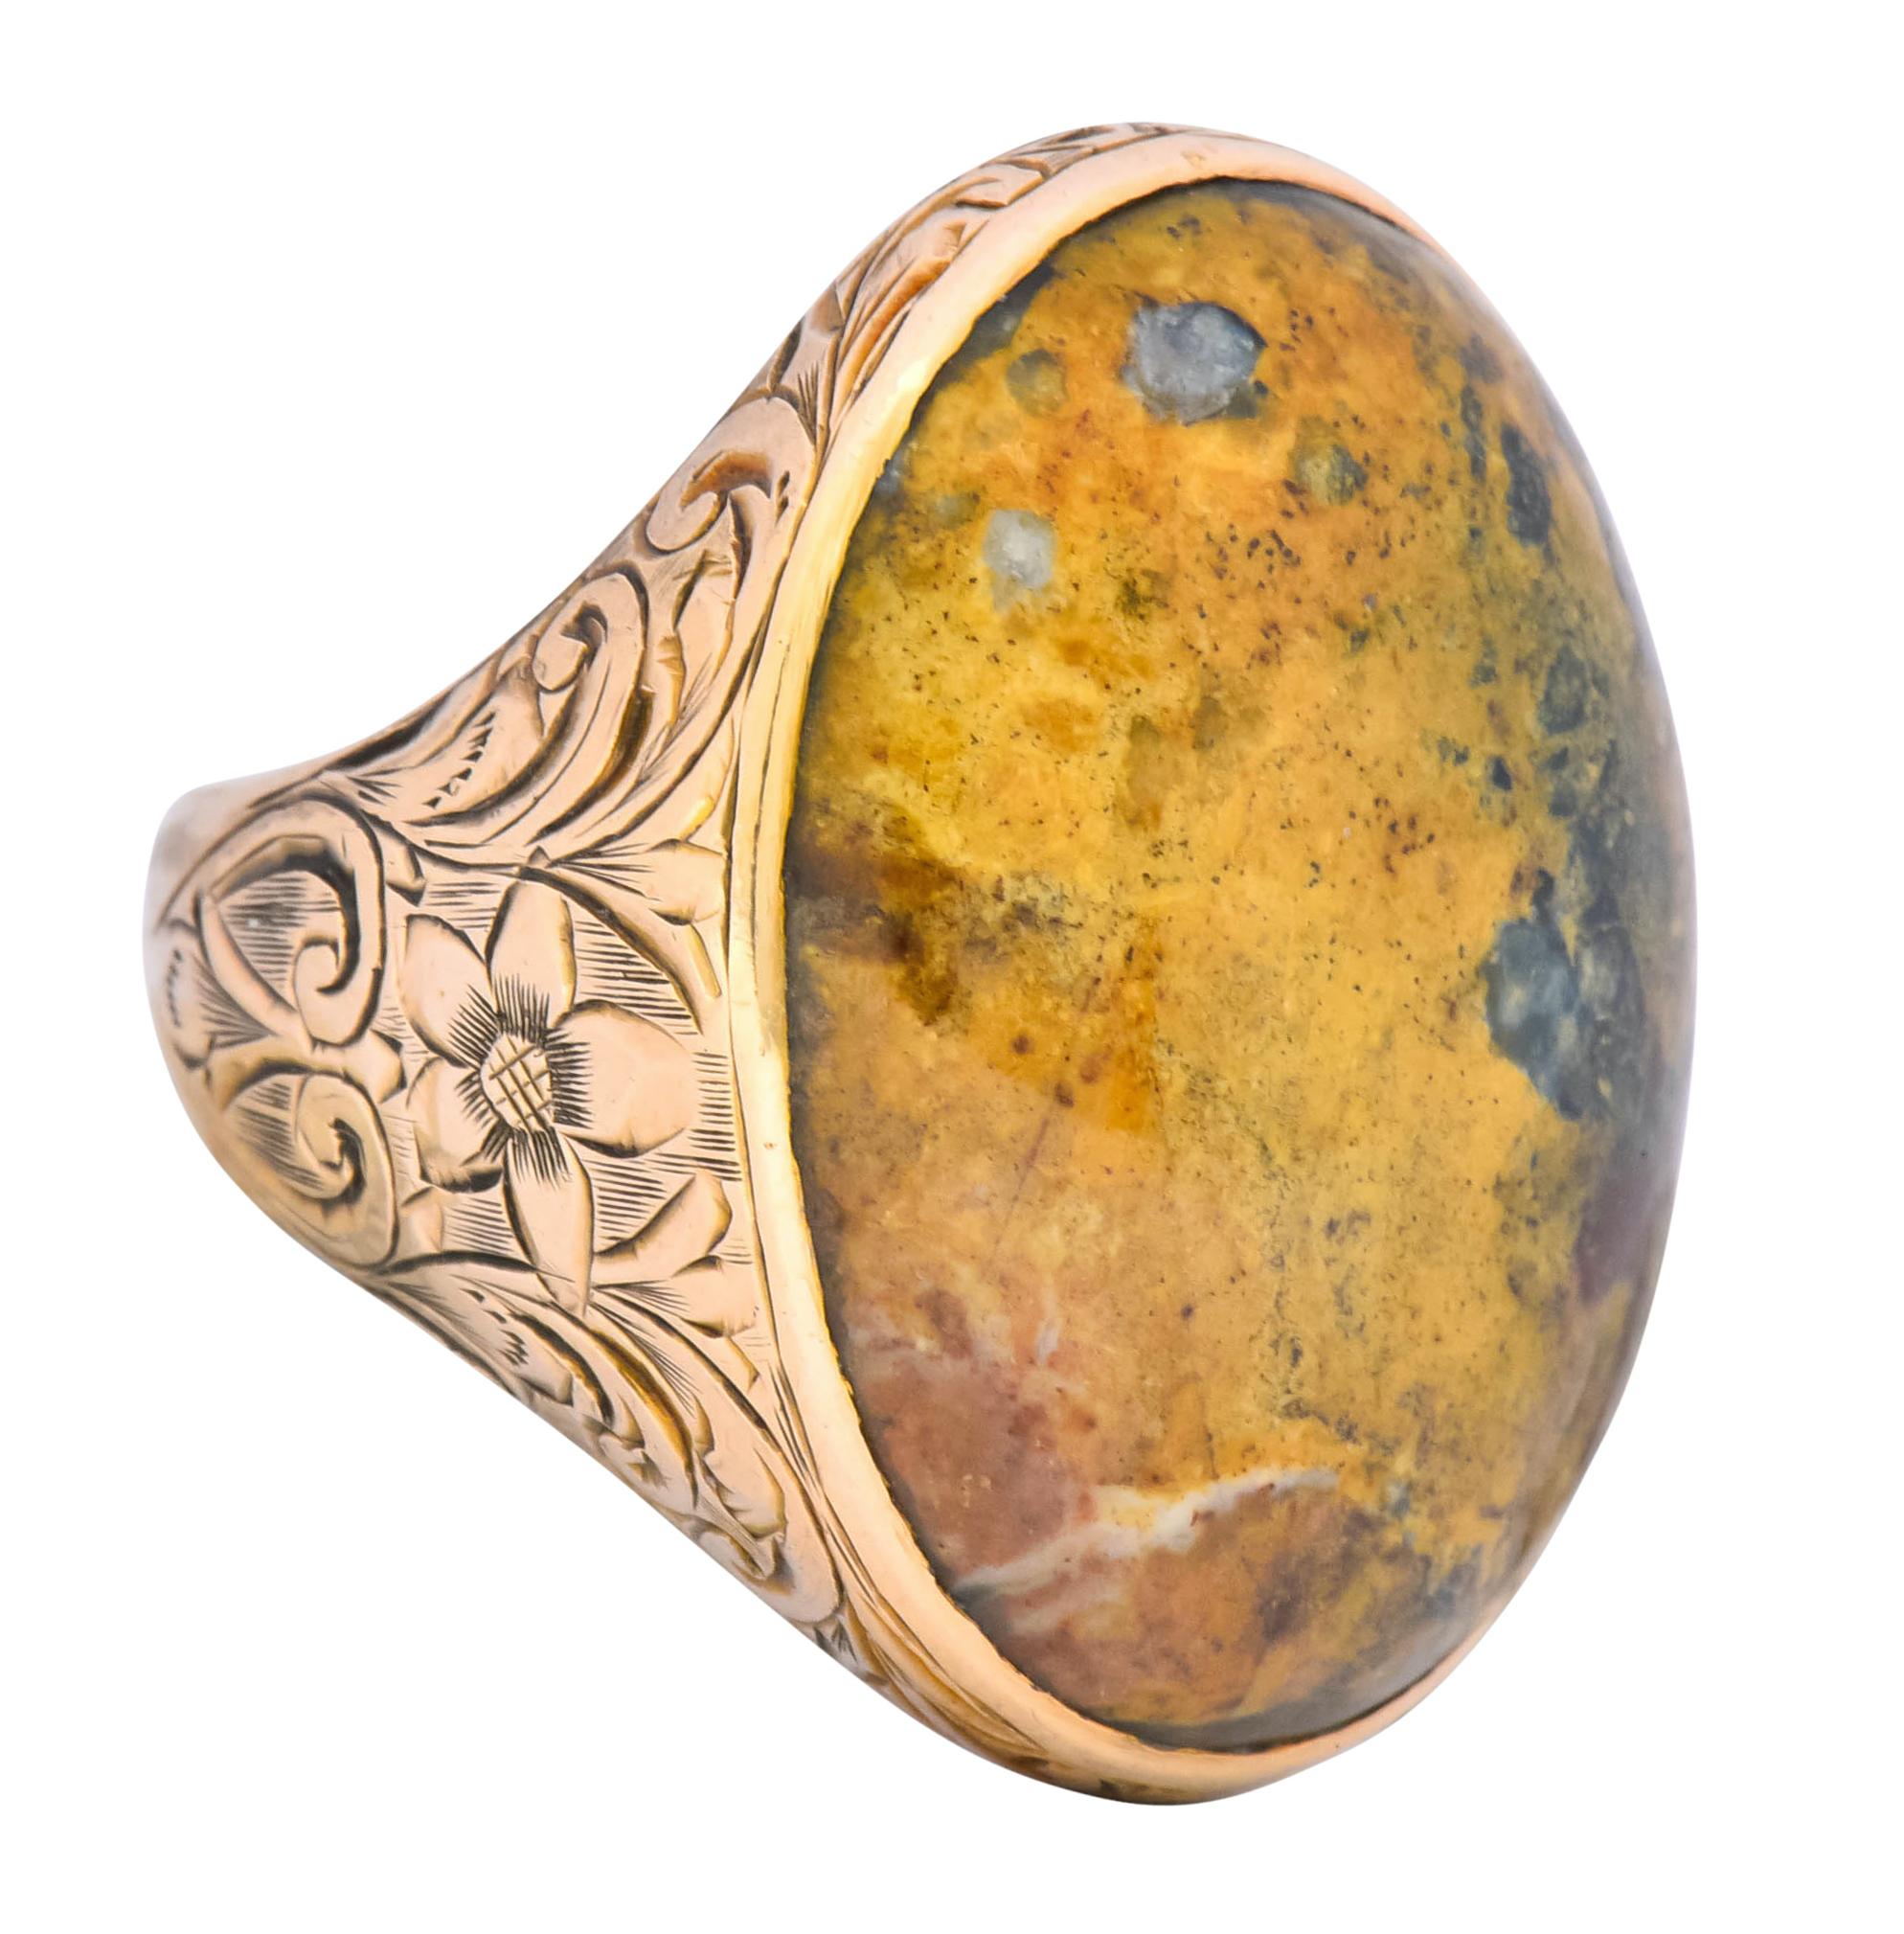 Centering an oval jasper cabochon measuring approximately 24.0 x 19.7 mm, opaque and marbled mustard yellow, rust red, and dark green

Bezel set in a decorative mounting deeply engraved with a scrolling foliate and floral motif

With maker's mark